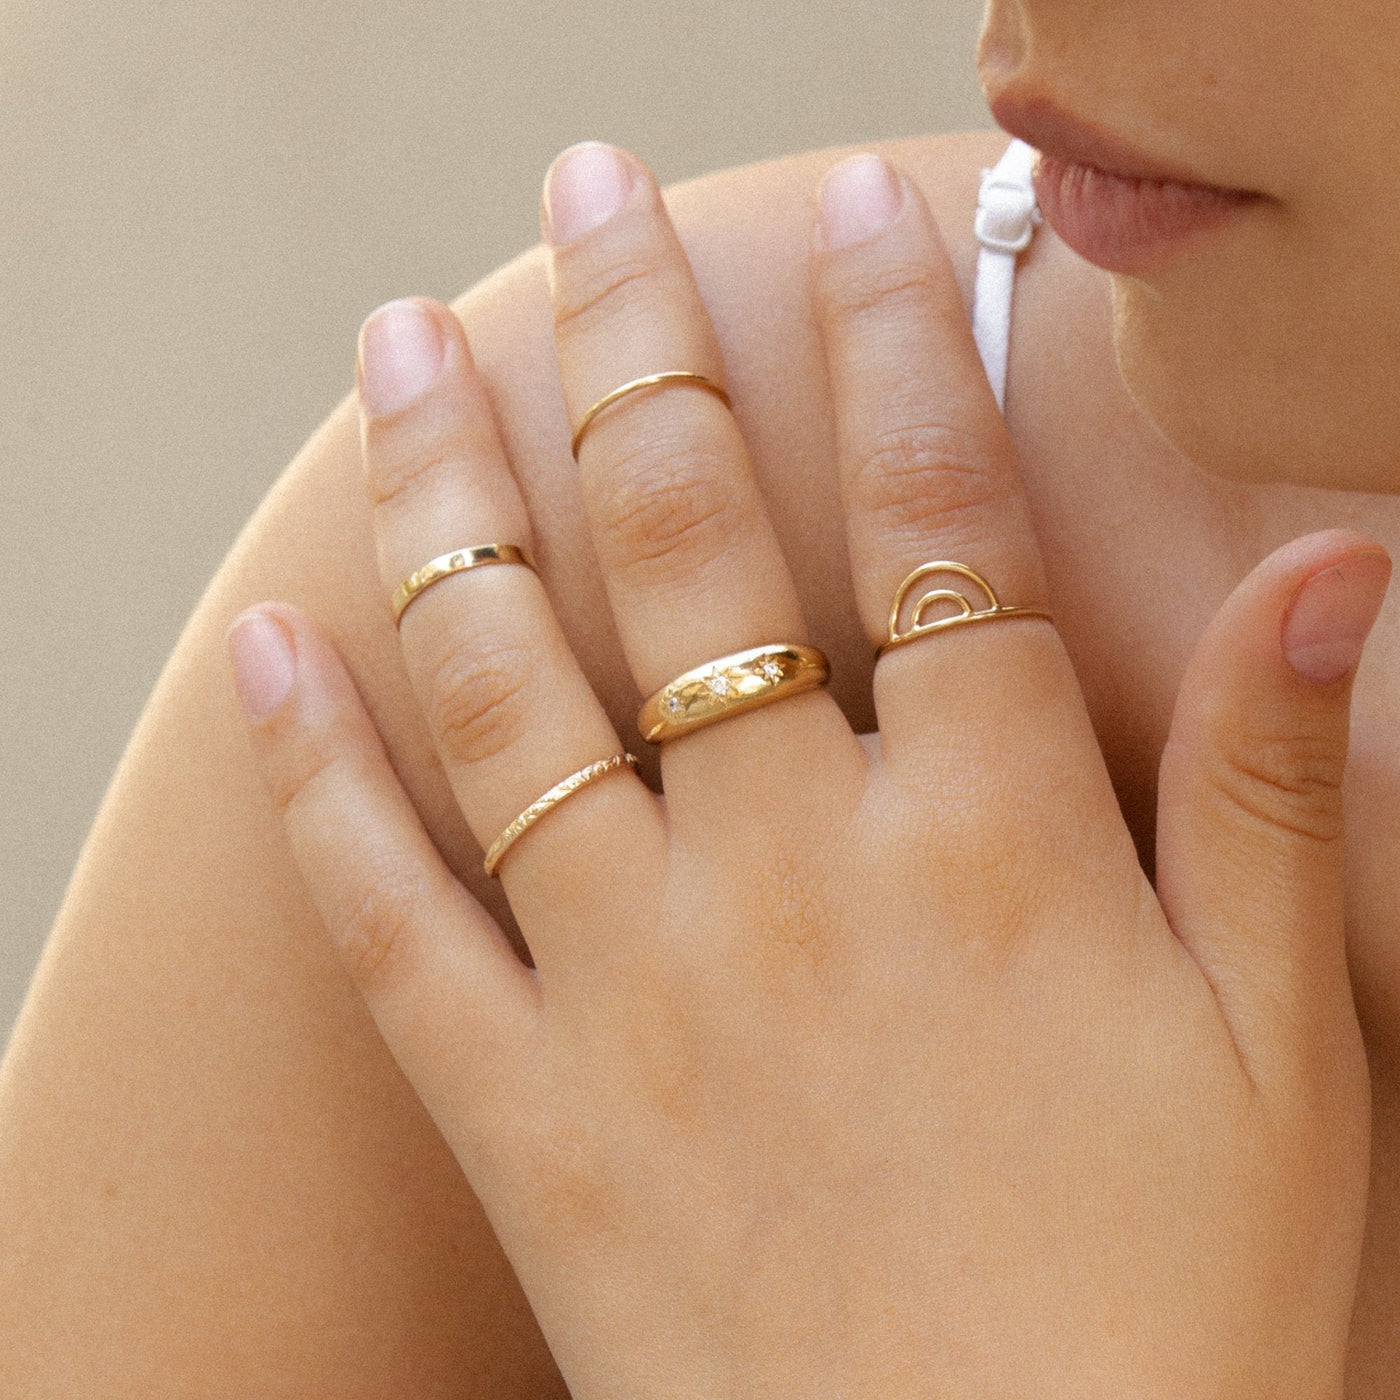 Rainbow Ring by Simple & Dainty Jewelry